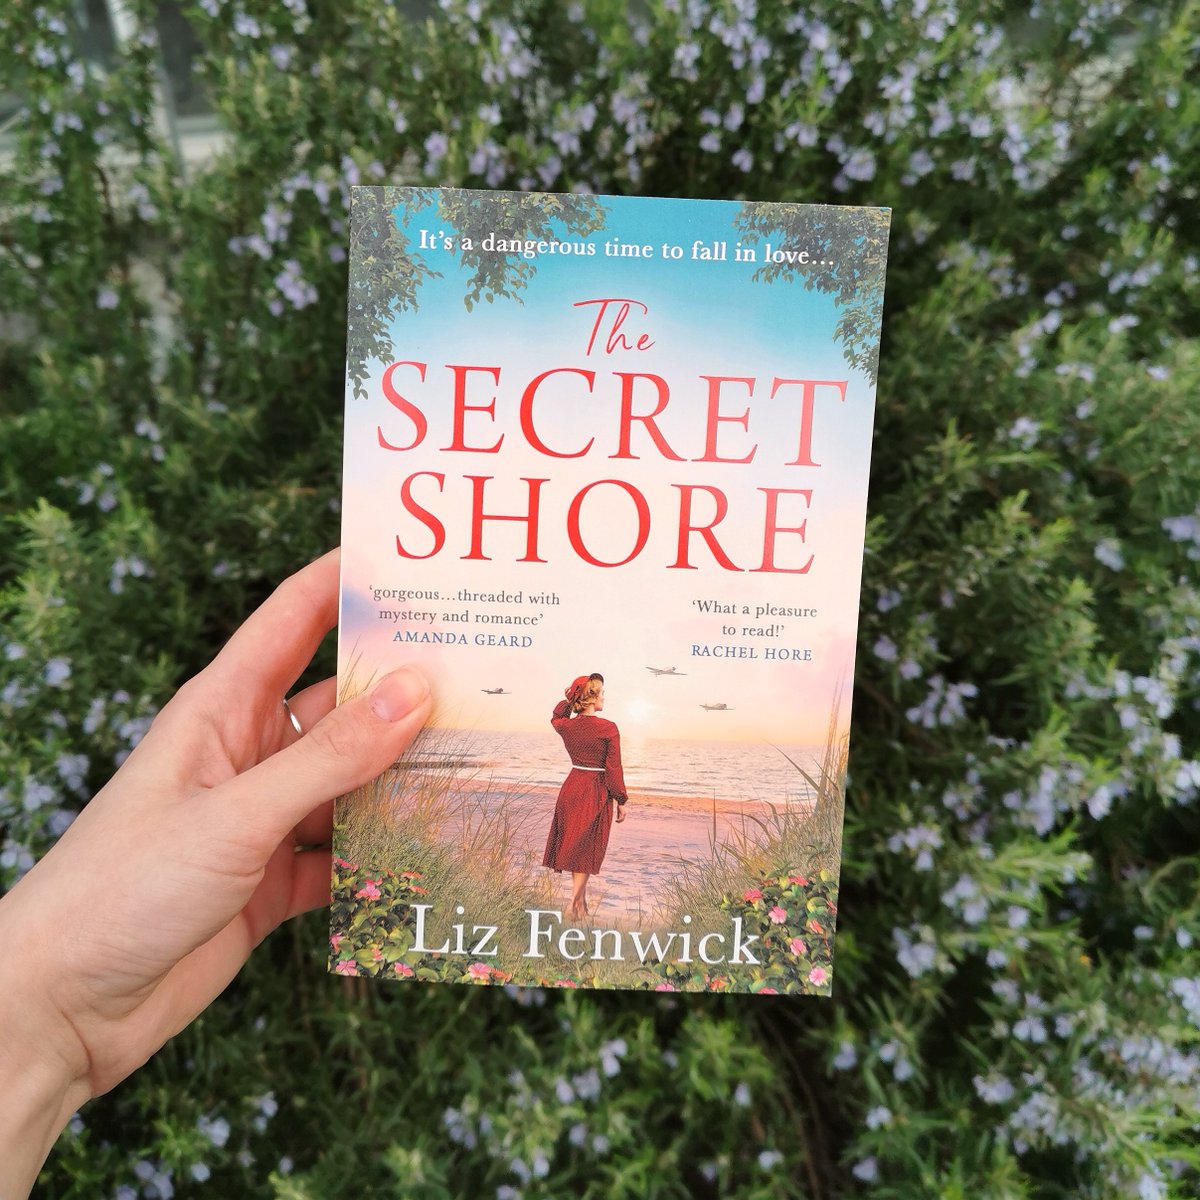 It's a dangerous time to fall in love... Award-winning author @liz_fenwick returns with a glorious, sweeping novel full of intrigue and passion this spring. #TheSecretShore is out in paperback on March 28th. Pre-order now: ow.ly/M3YY50R99fB